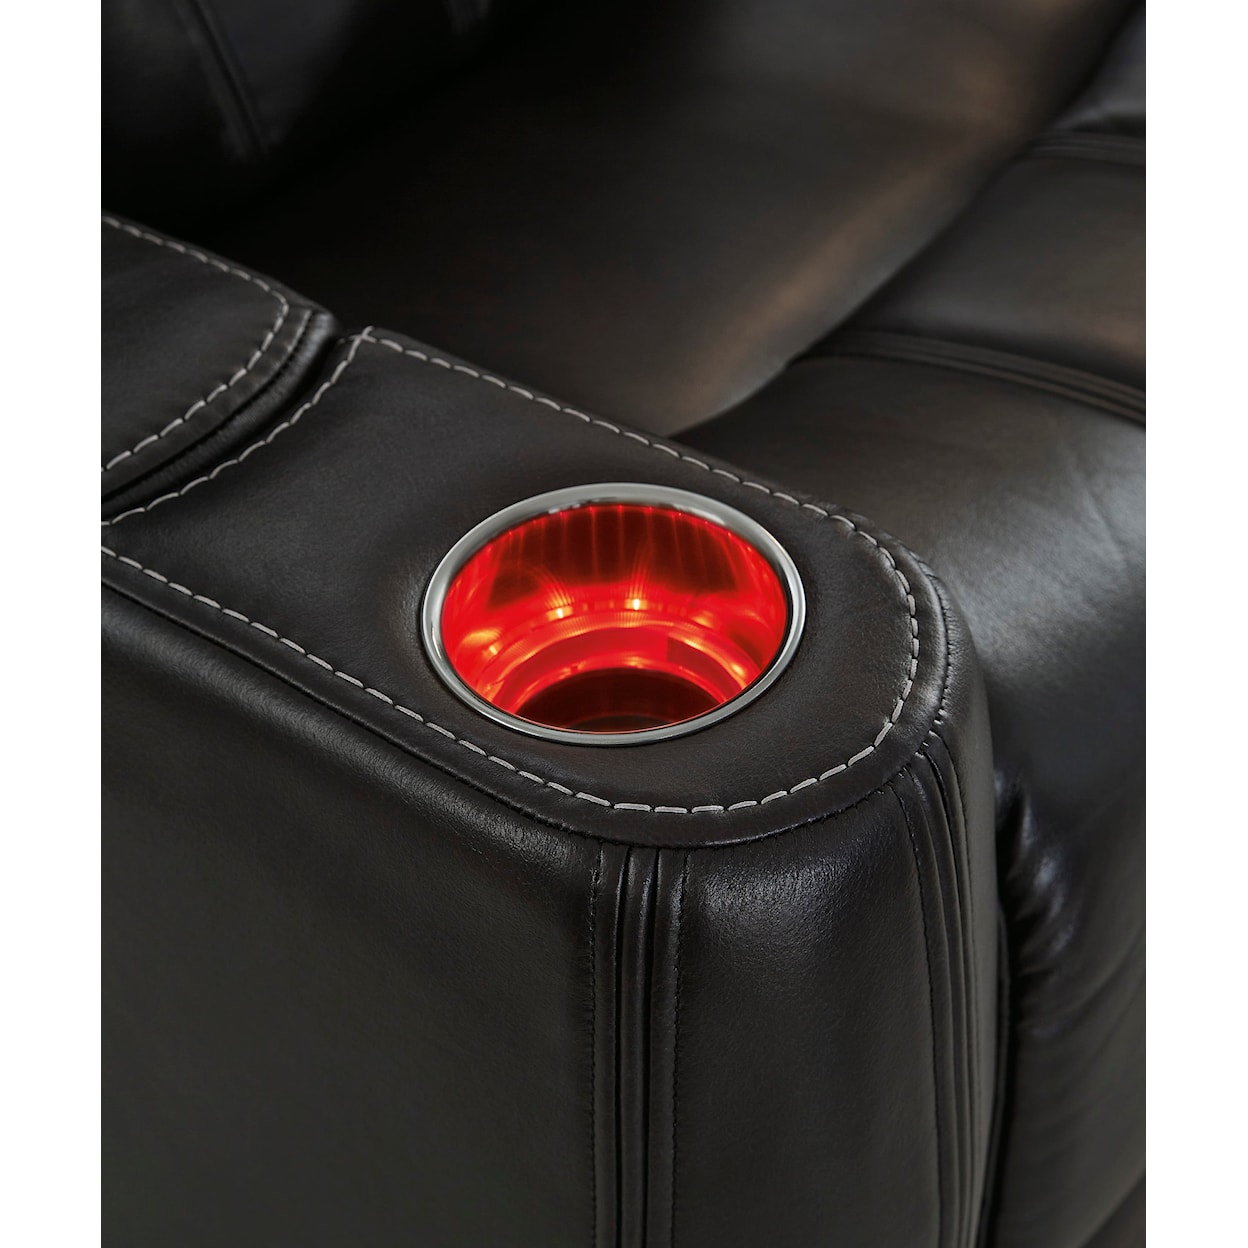 Signature Design by Ashley Furniture Benndale Power Recliner